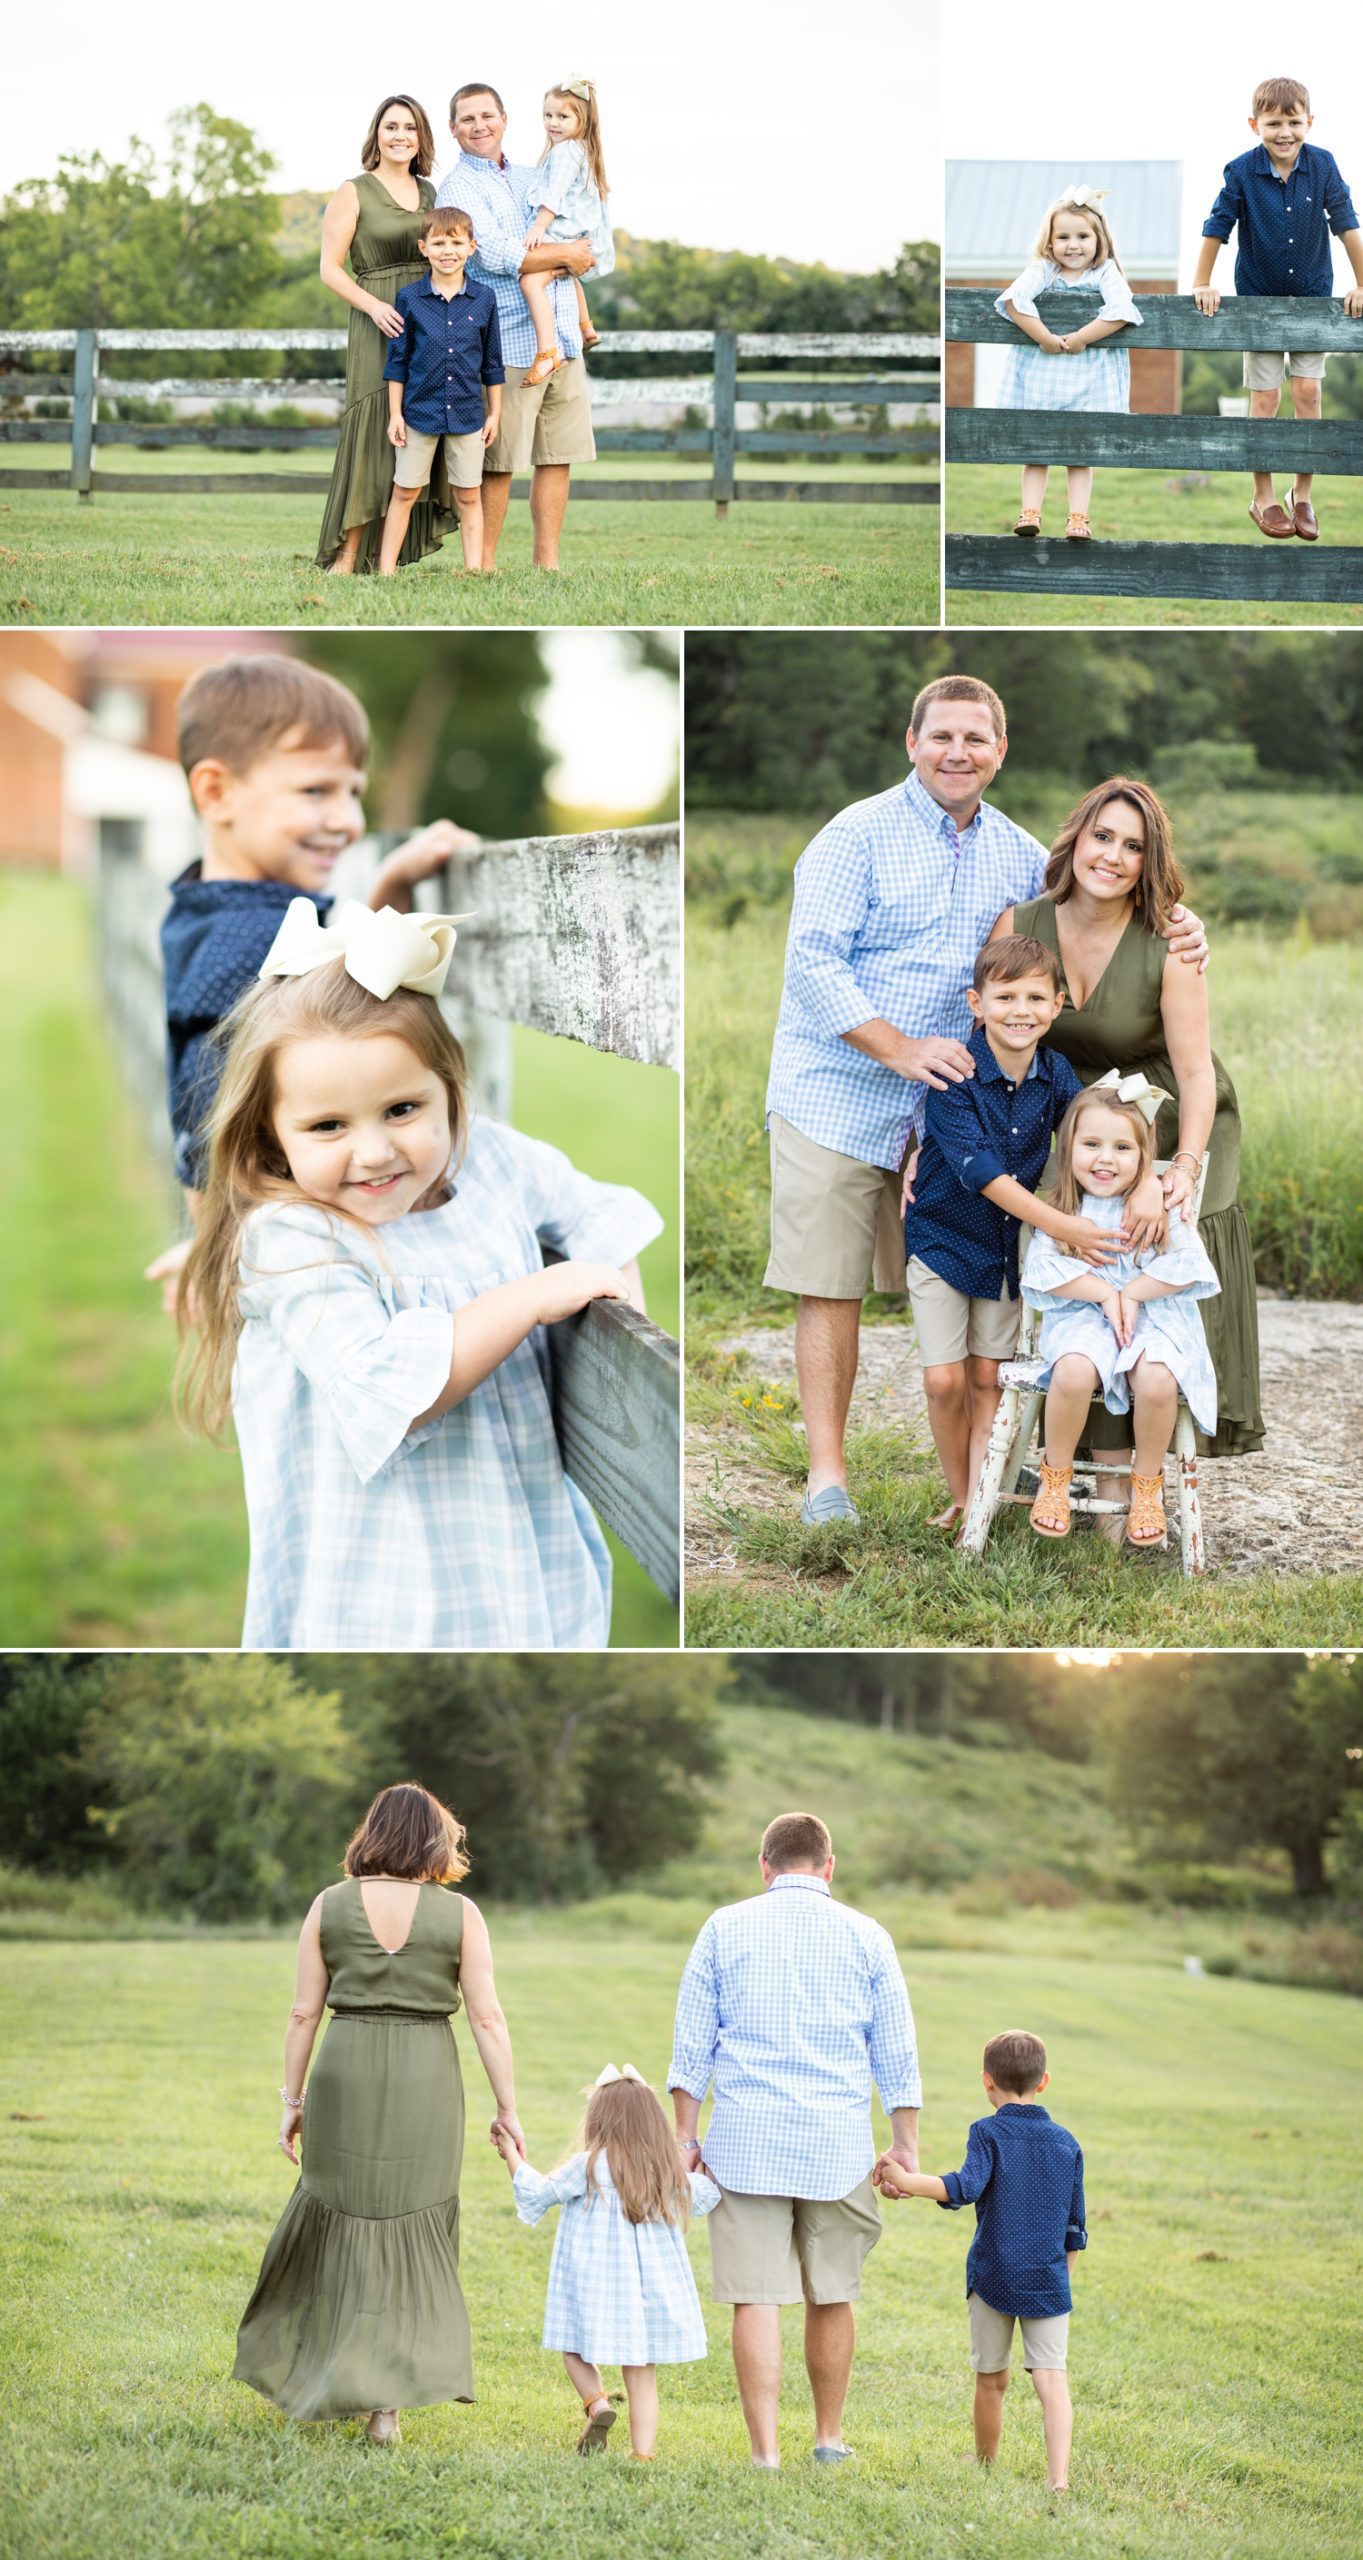 Family portrait photography mini session at Ravenswood Mansion, Brentwood, TN Photos by Krista Lee Photography